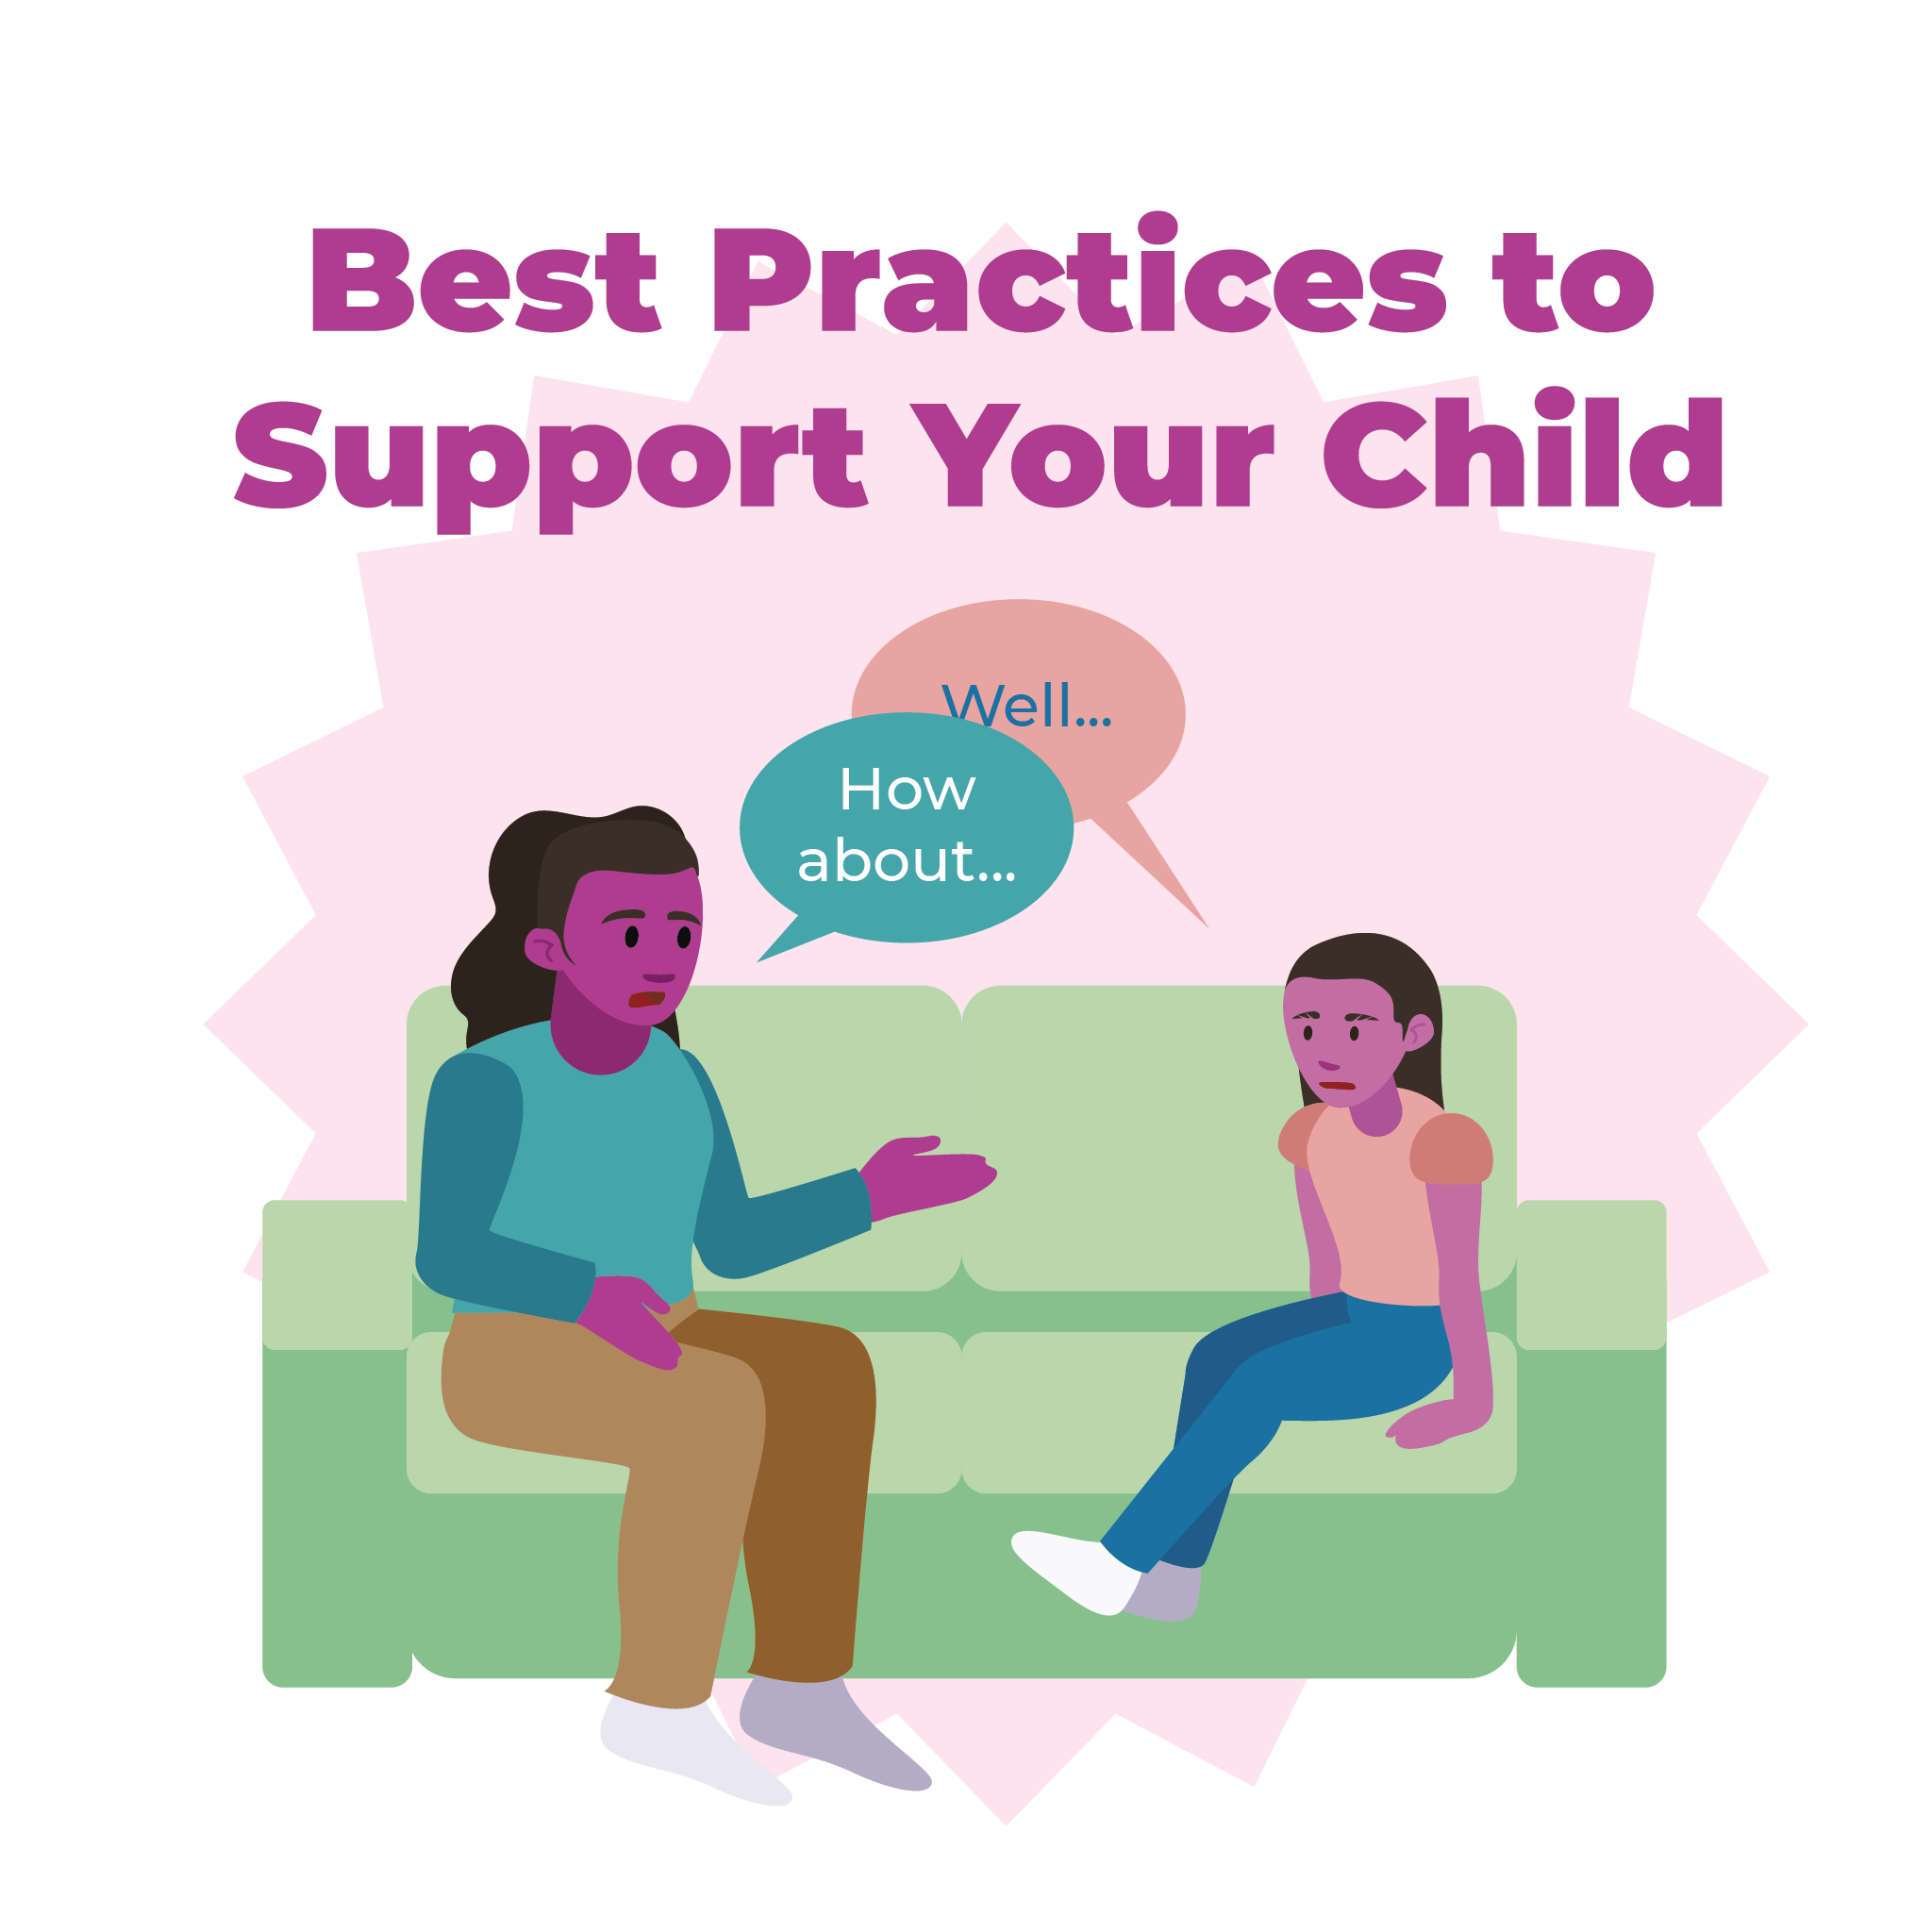 Best practices to support your child.